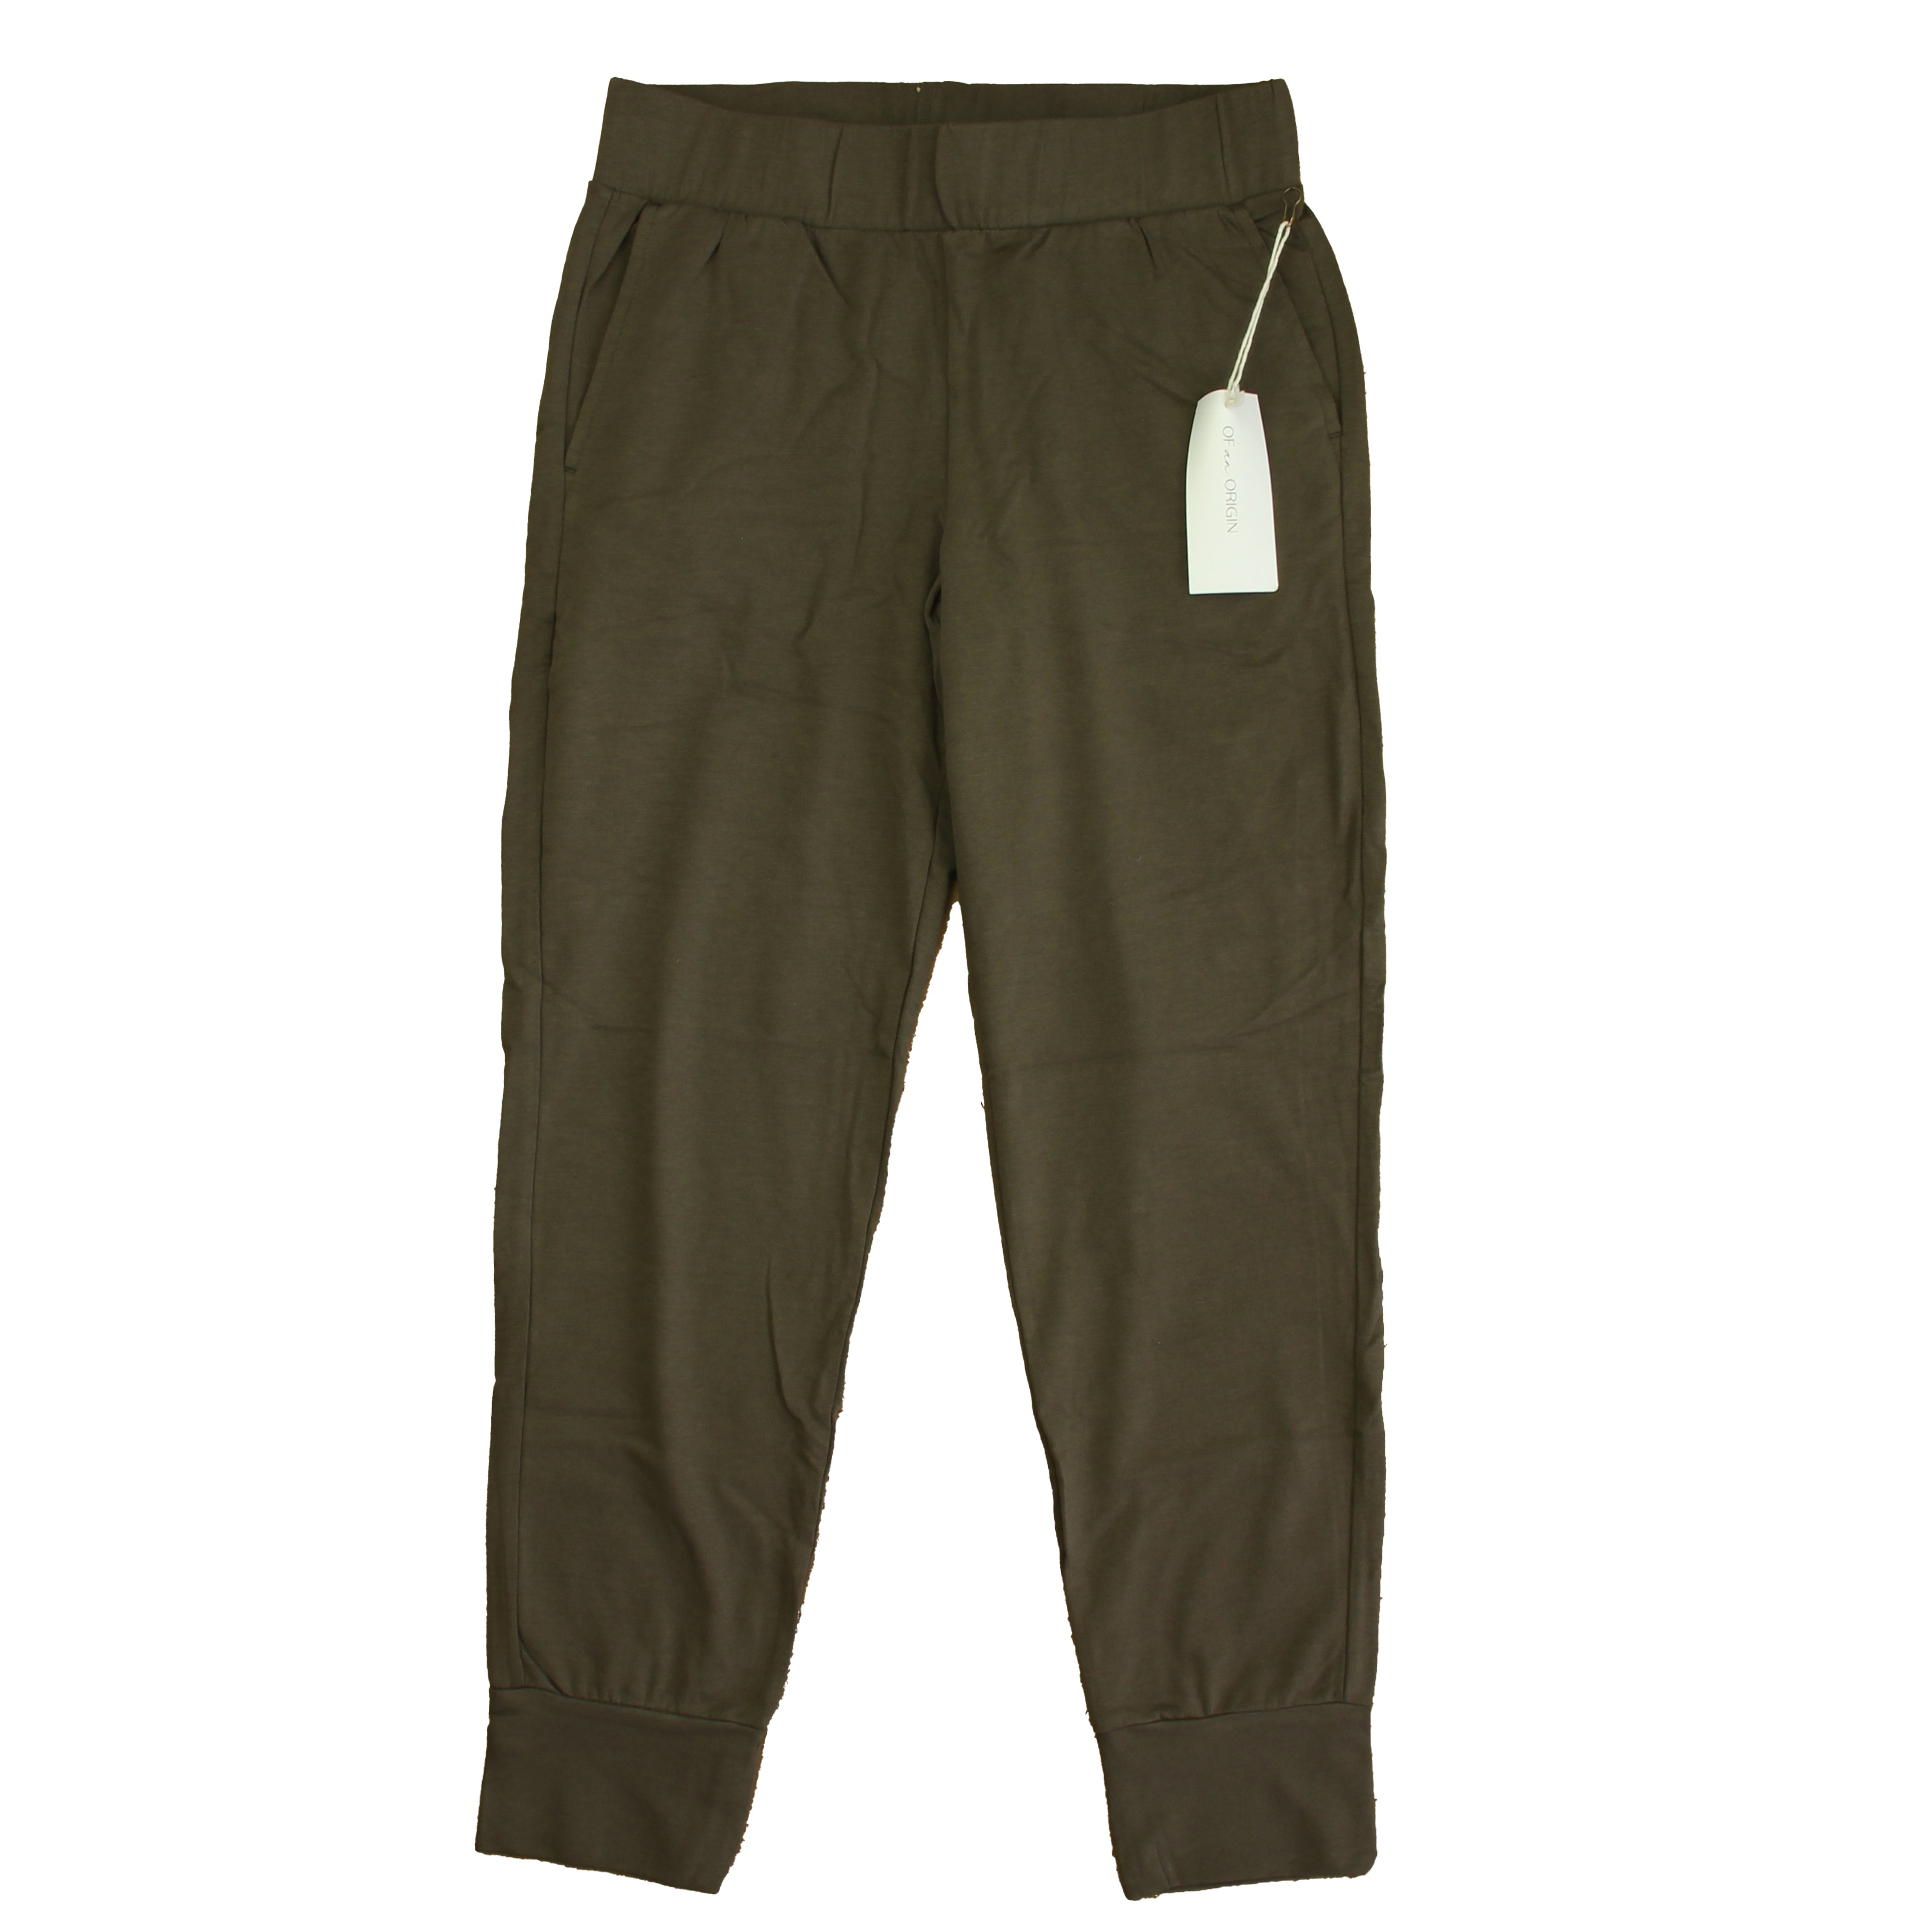 Pre-owned Sage Pants size: Adult XS-XL